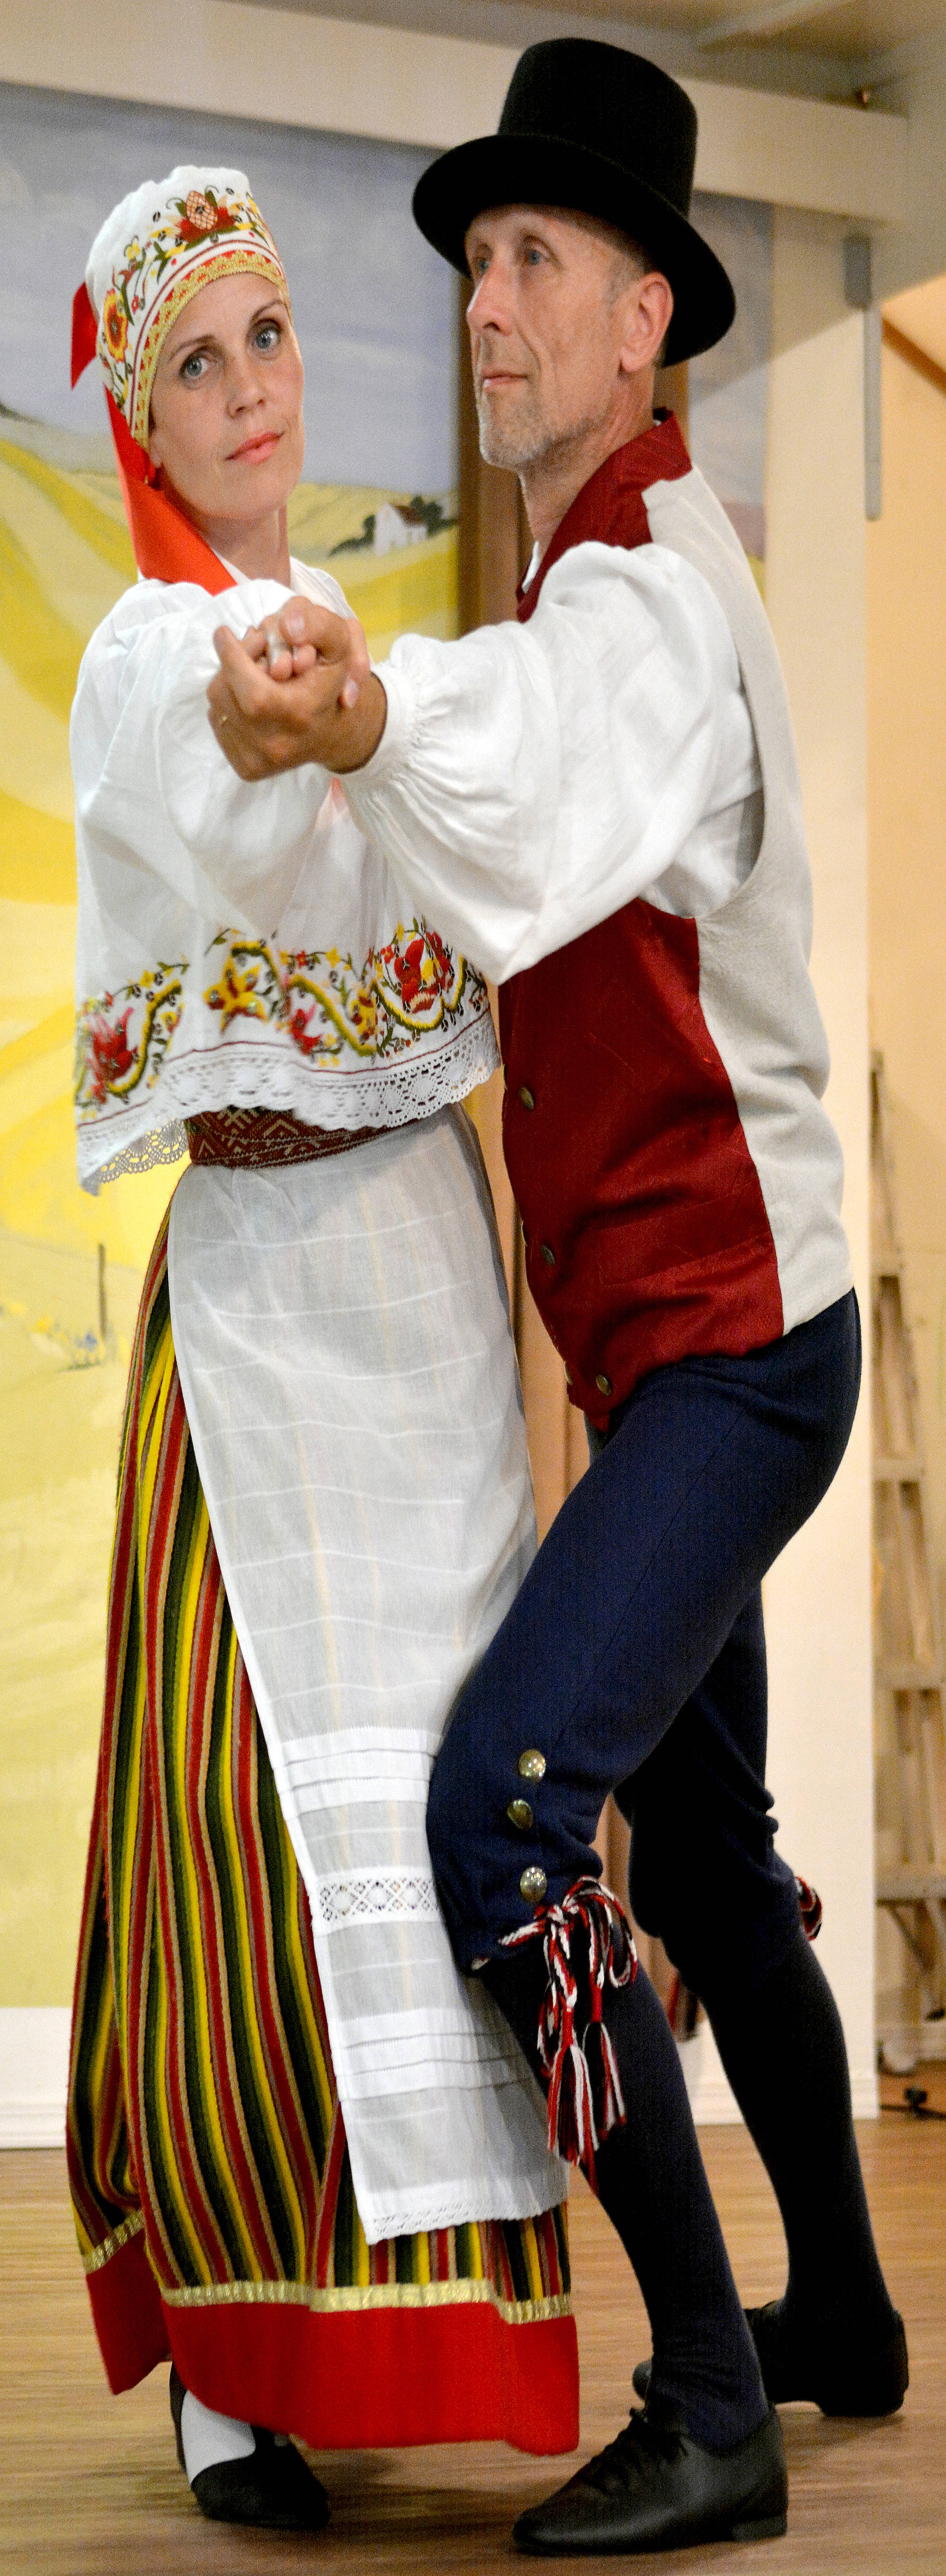 Dancers Janne and Toomas Kuuskla from Estonia for the AEHS Estonia 100 Jaanipaev Celebration in Stettler County on June 23. (Lisa Joy/Black Press News Services)